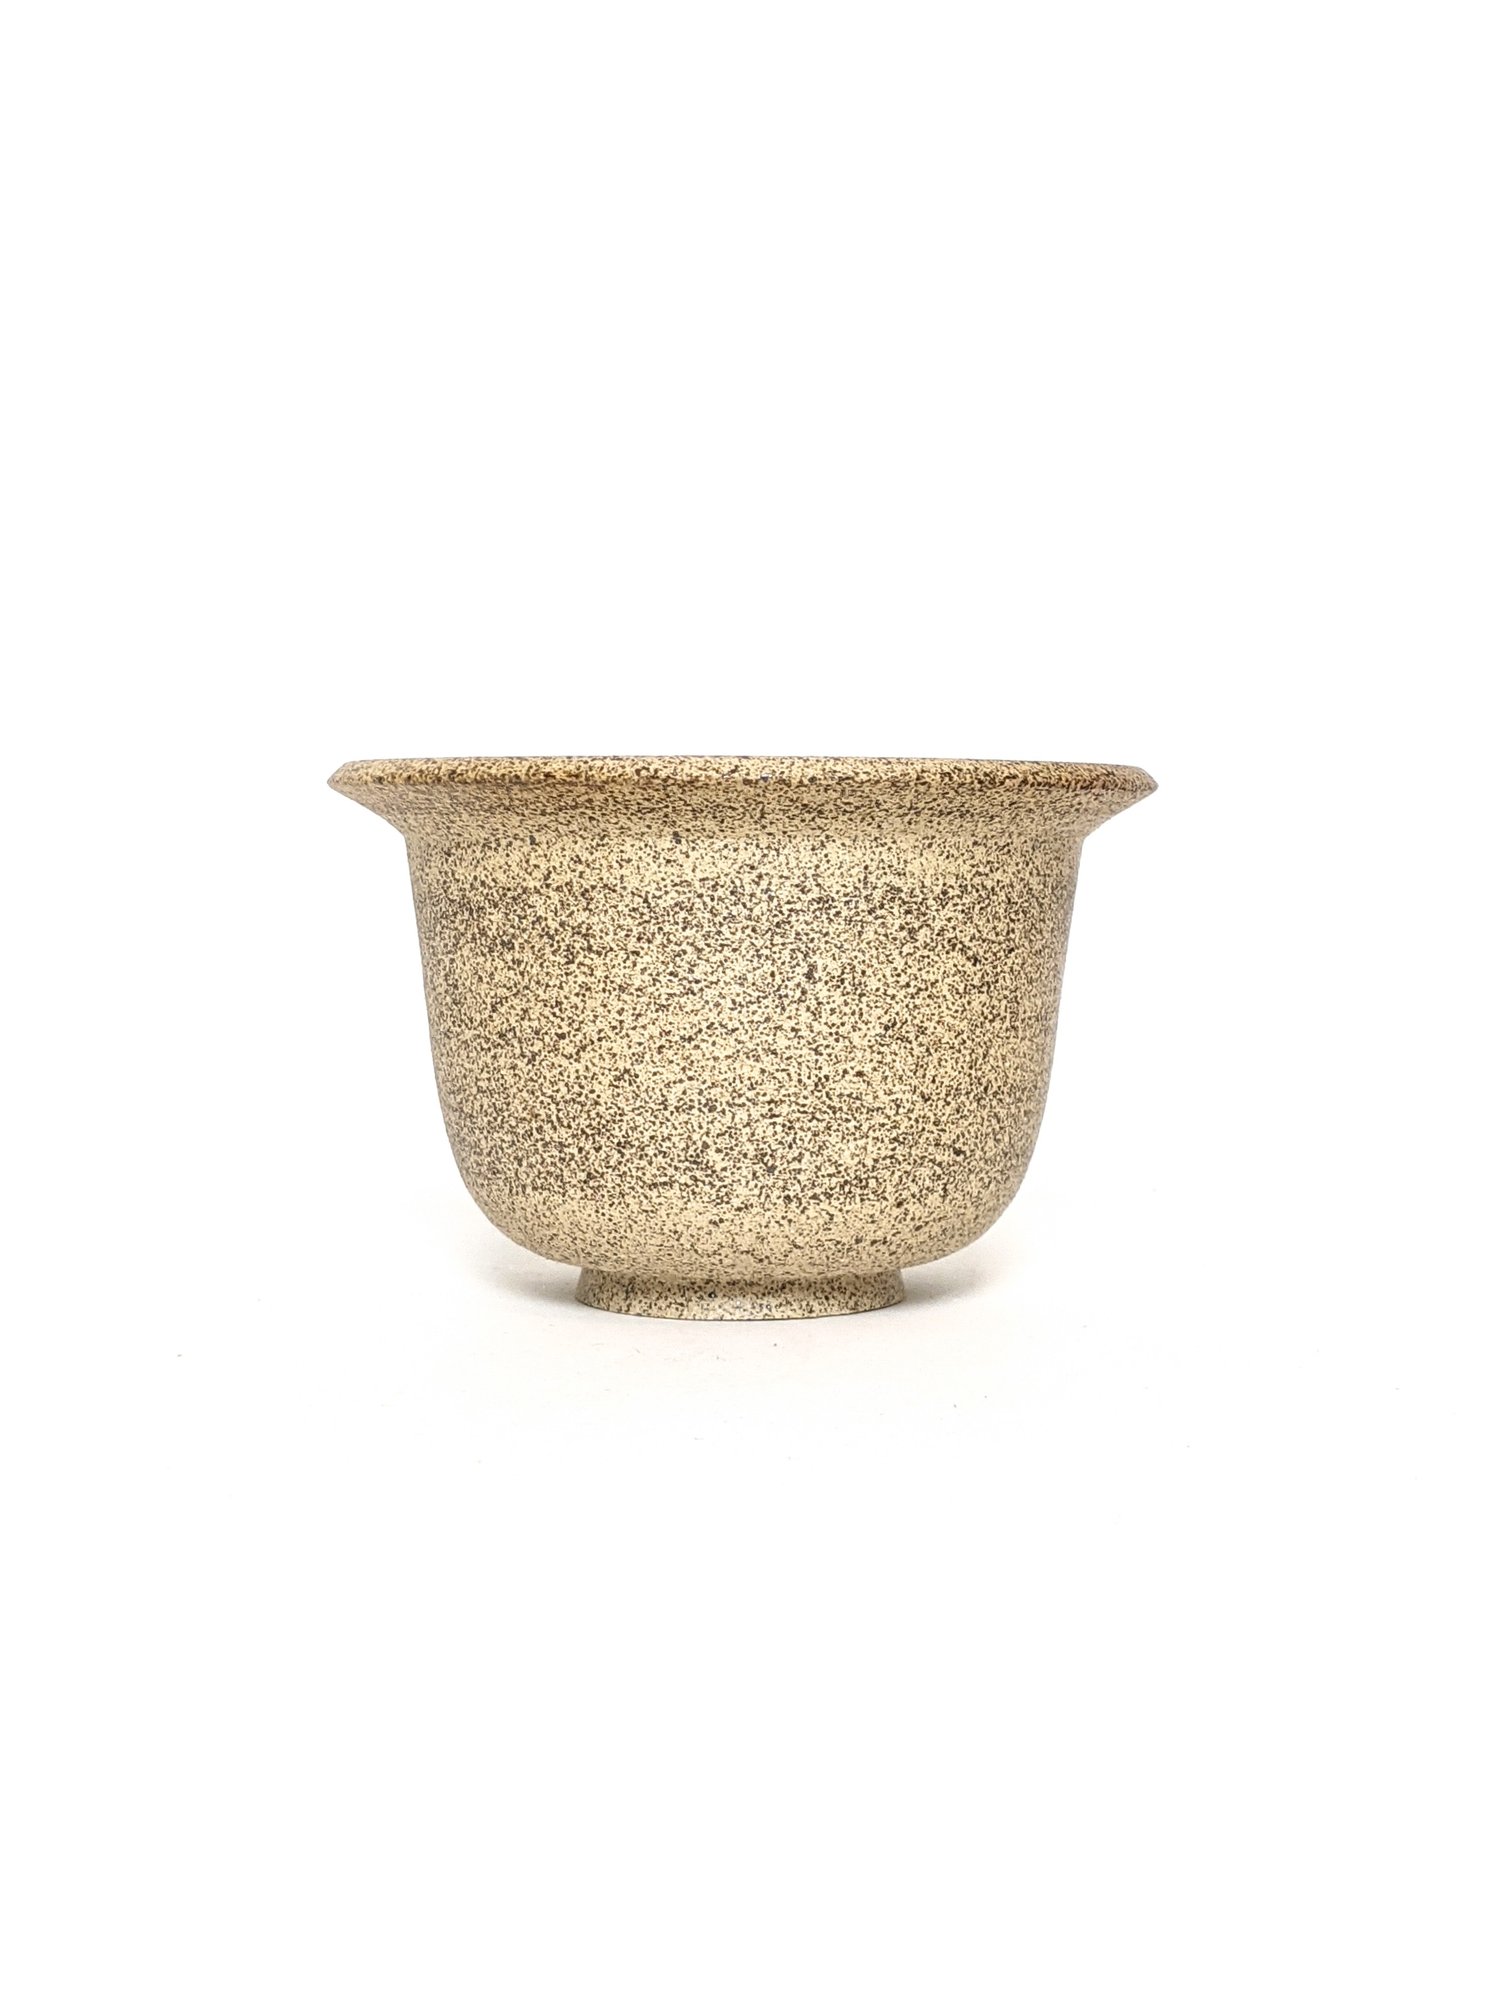 Electric Fired Flared Cup in Raw Speckled Stoneware